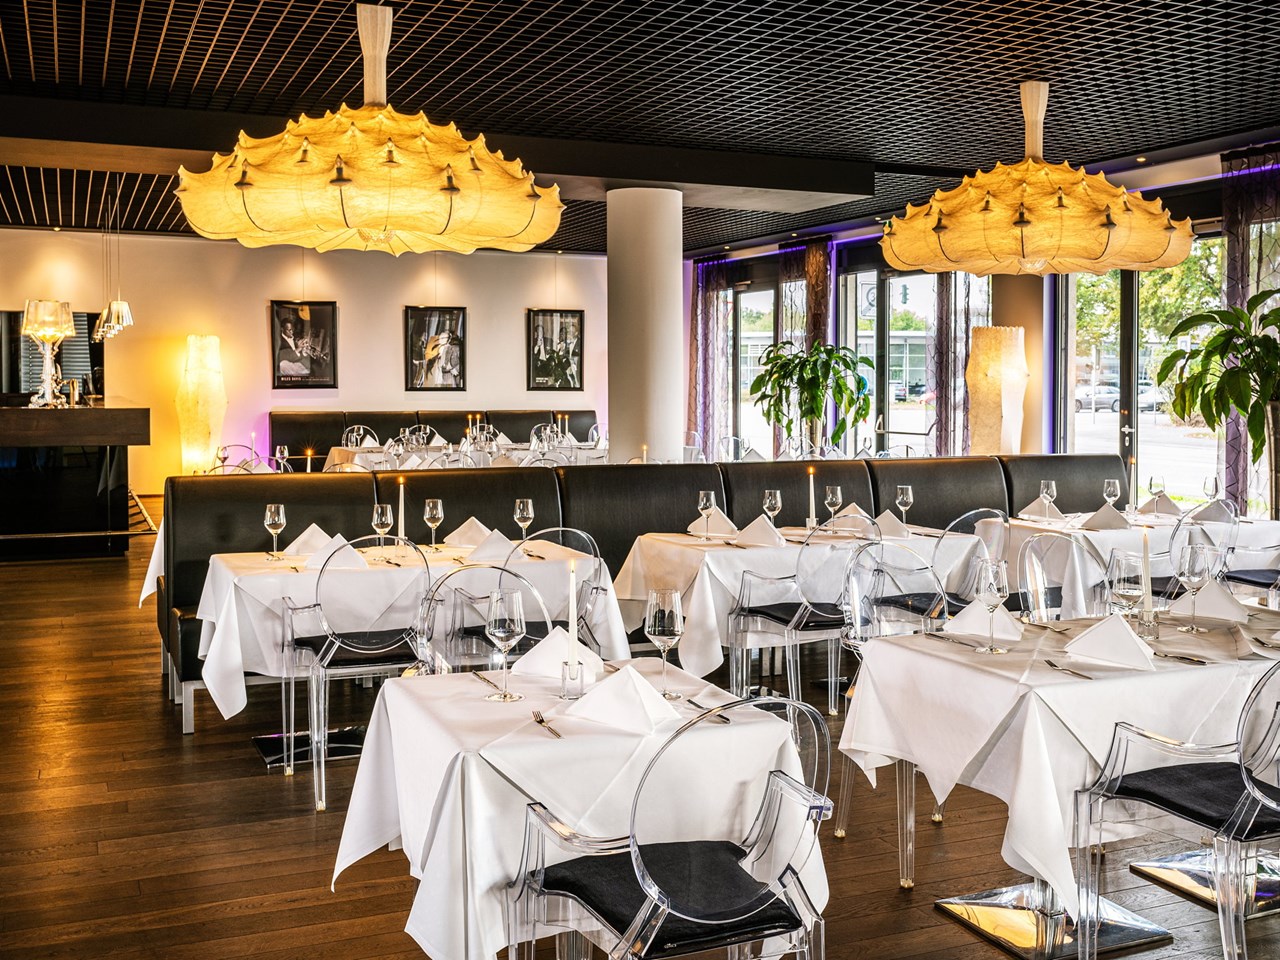 The Club Victor's Eventlocation Saarlouis Information about the banquet halls The Club